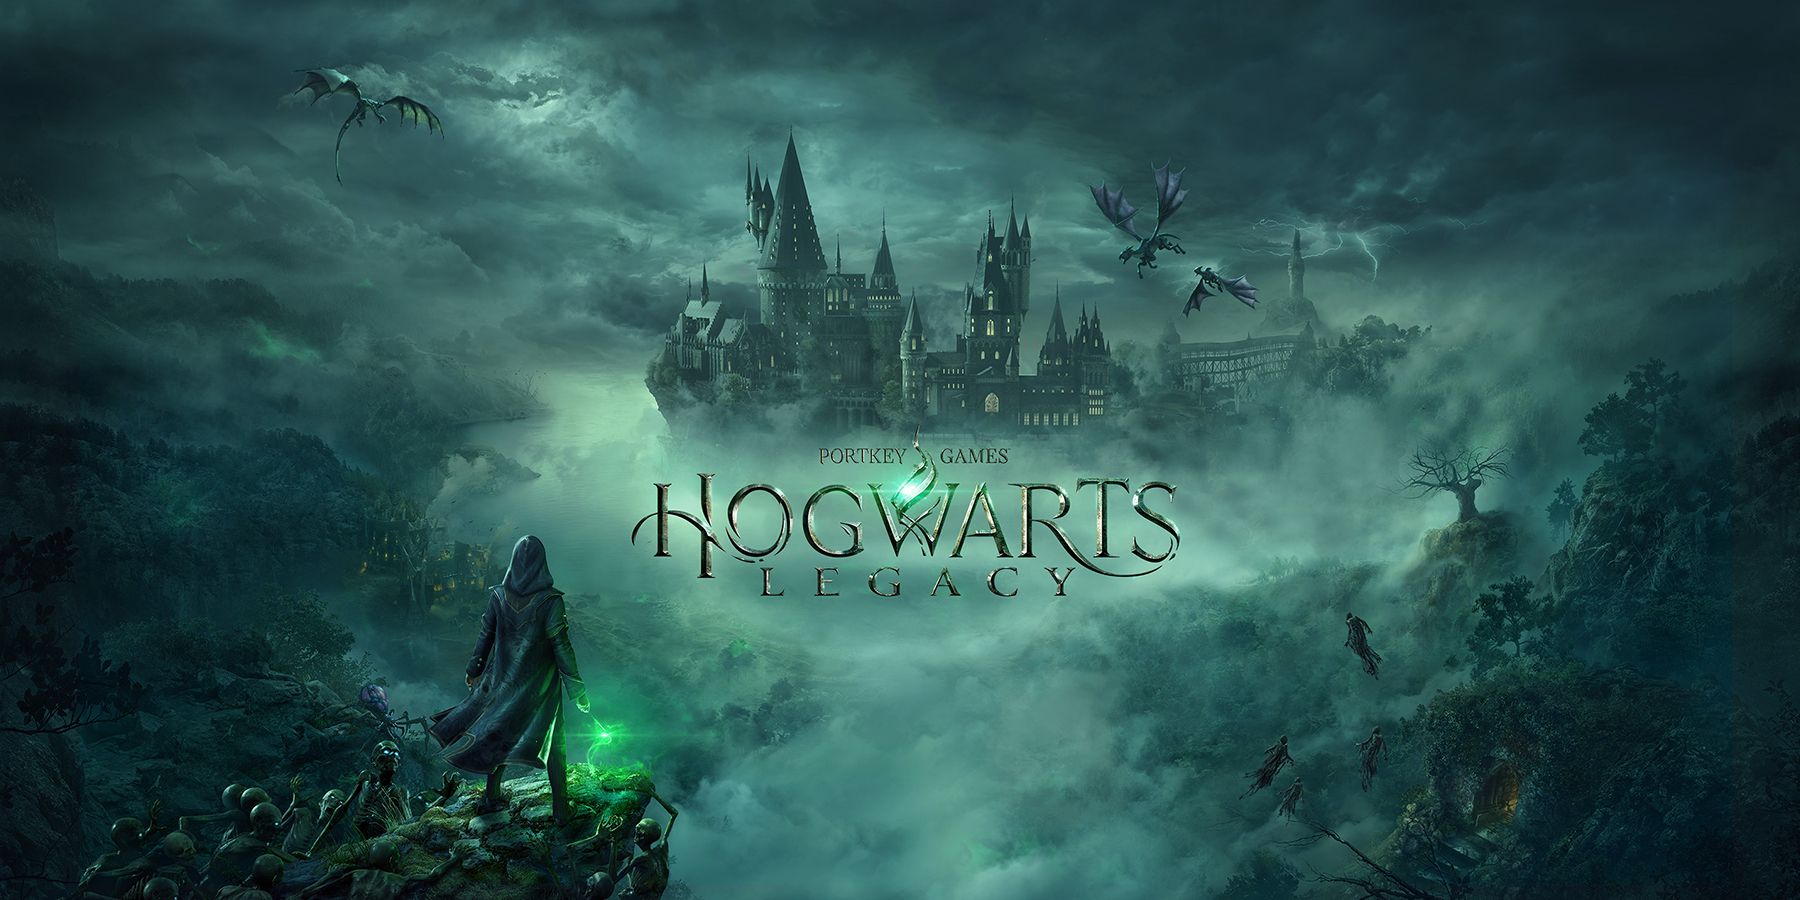 Hogwarts Legacy is the most wishlisted title on Steam, and one of the top  sellers on the platform - Meristation